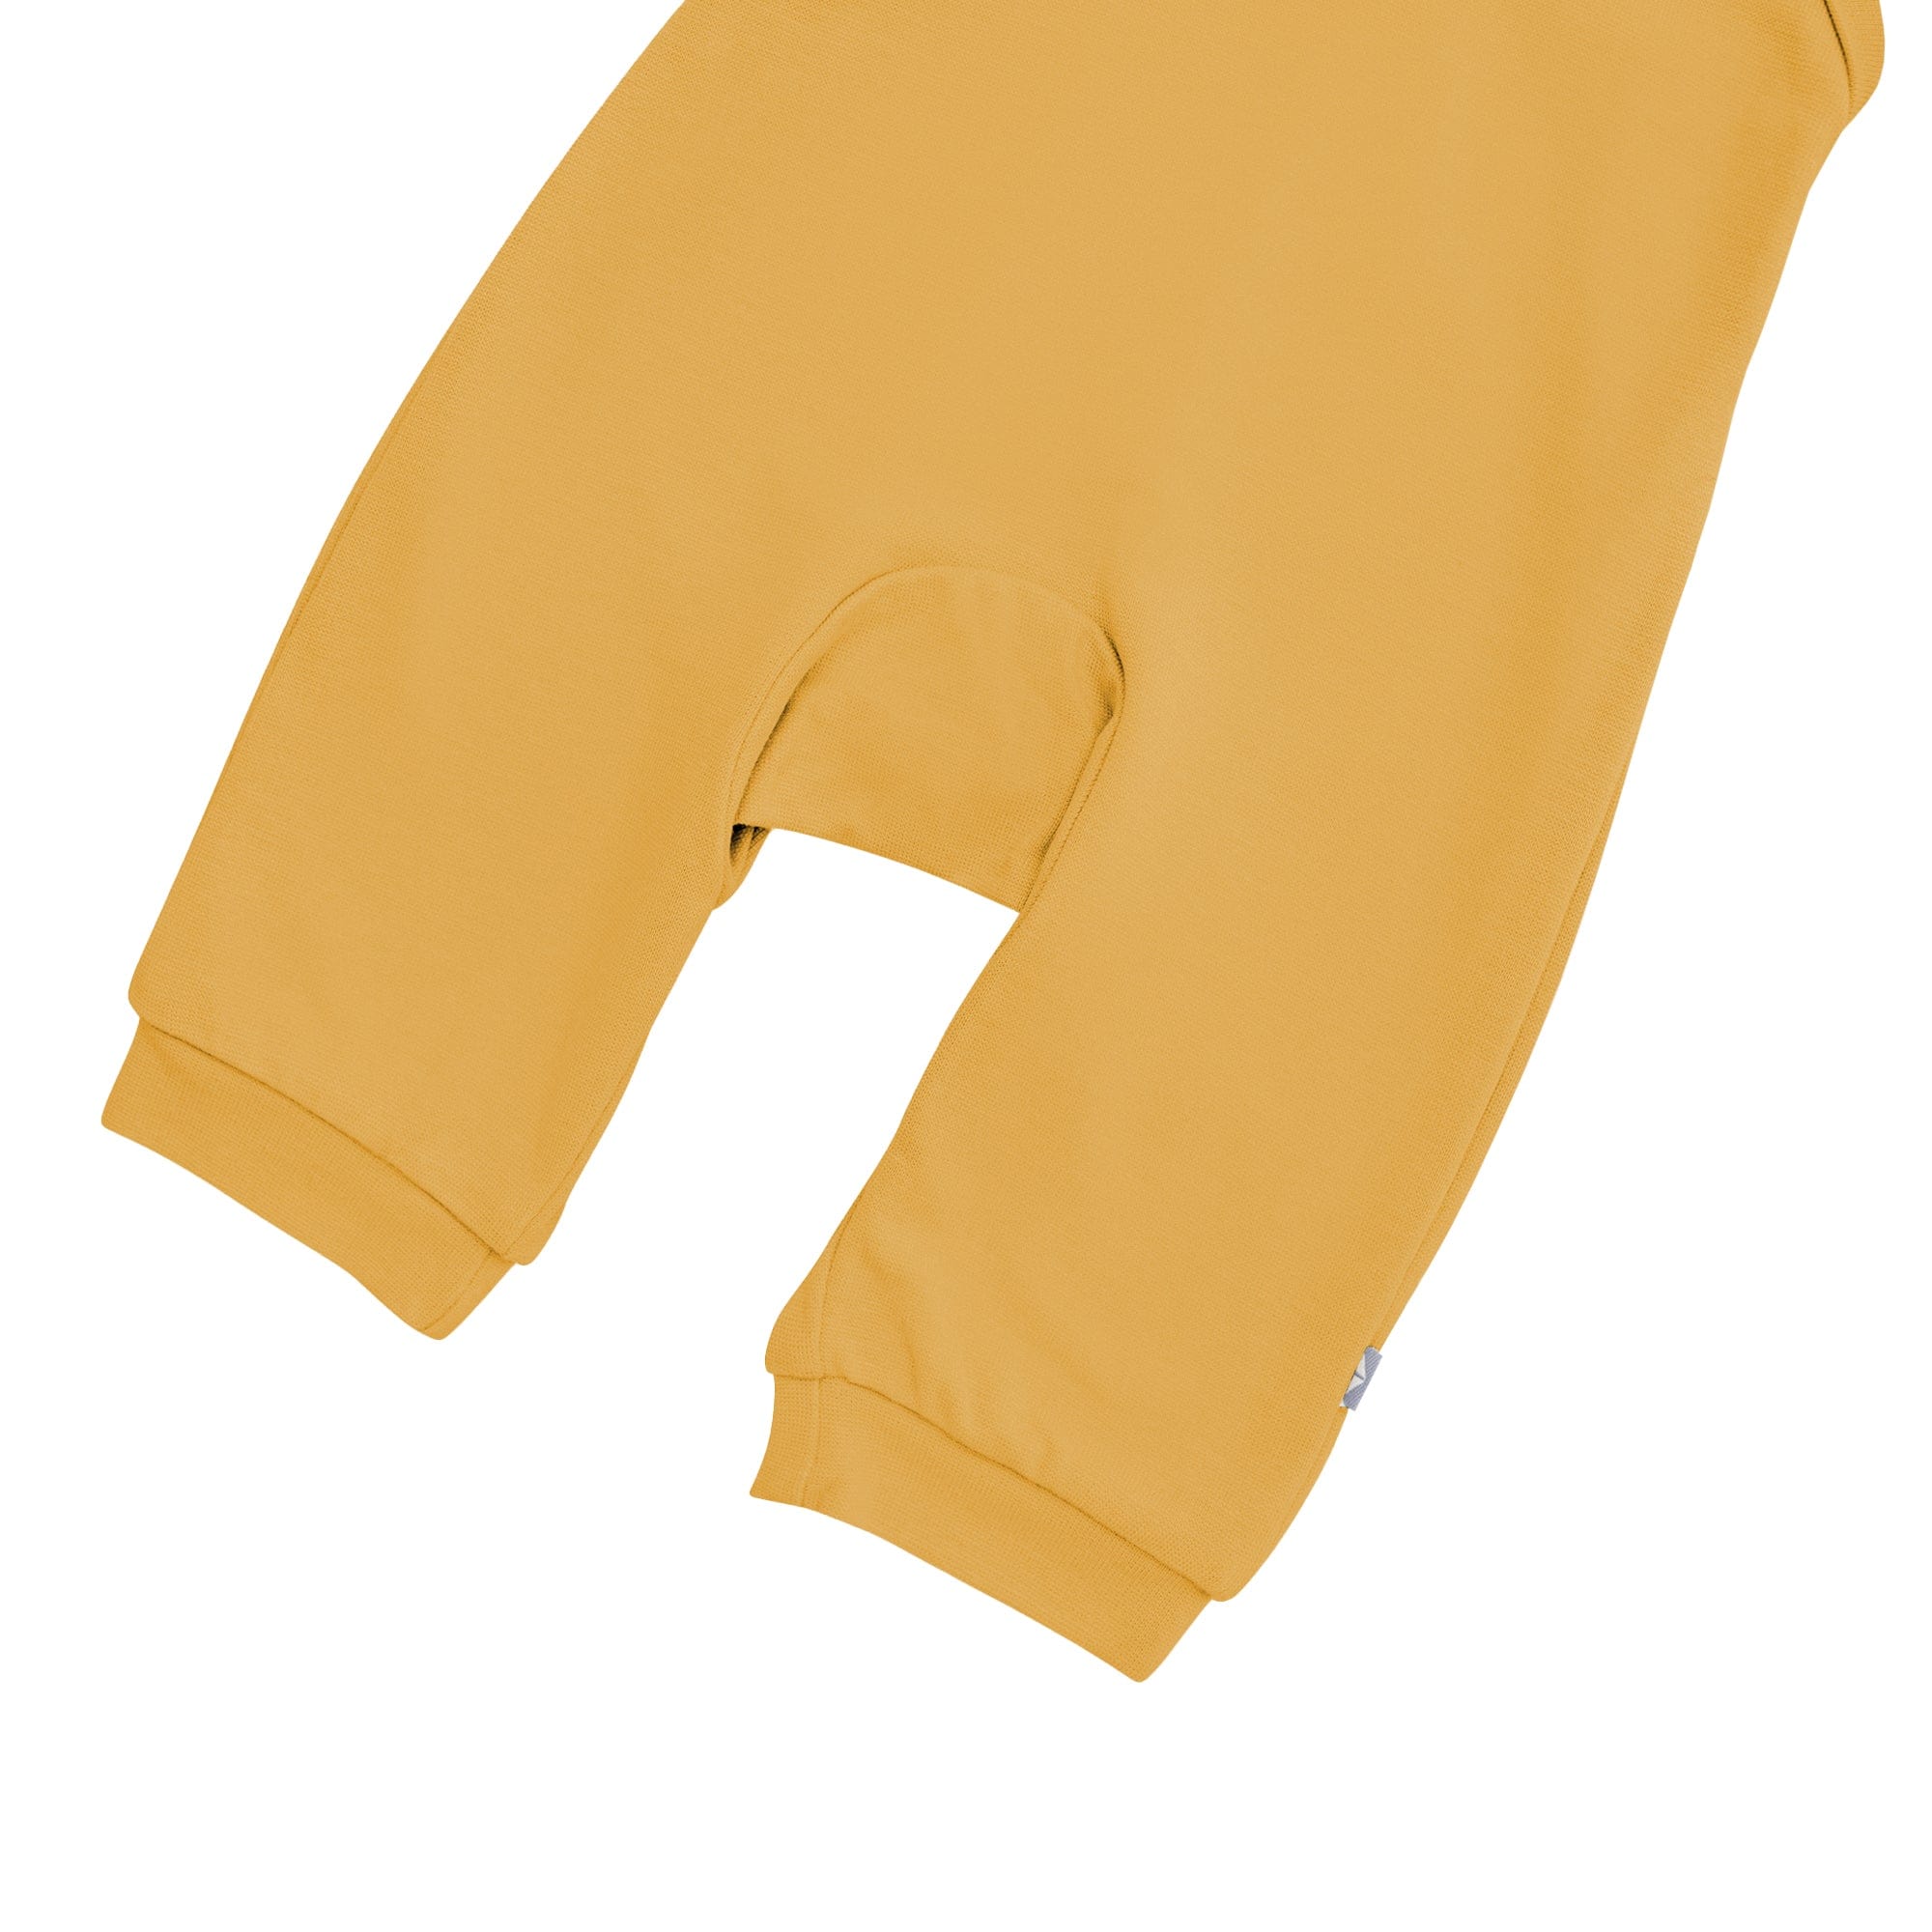 Kyte BABY Baby Overall Bamboo Jersey Overall in Marigold